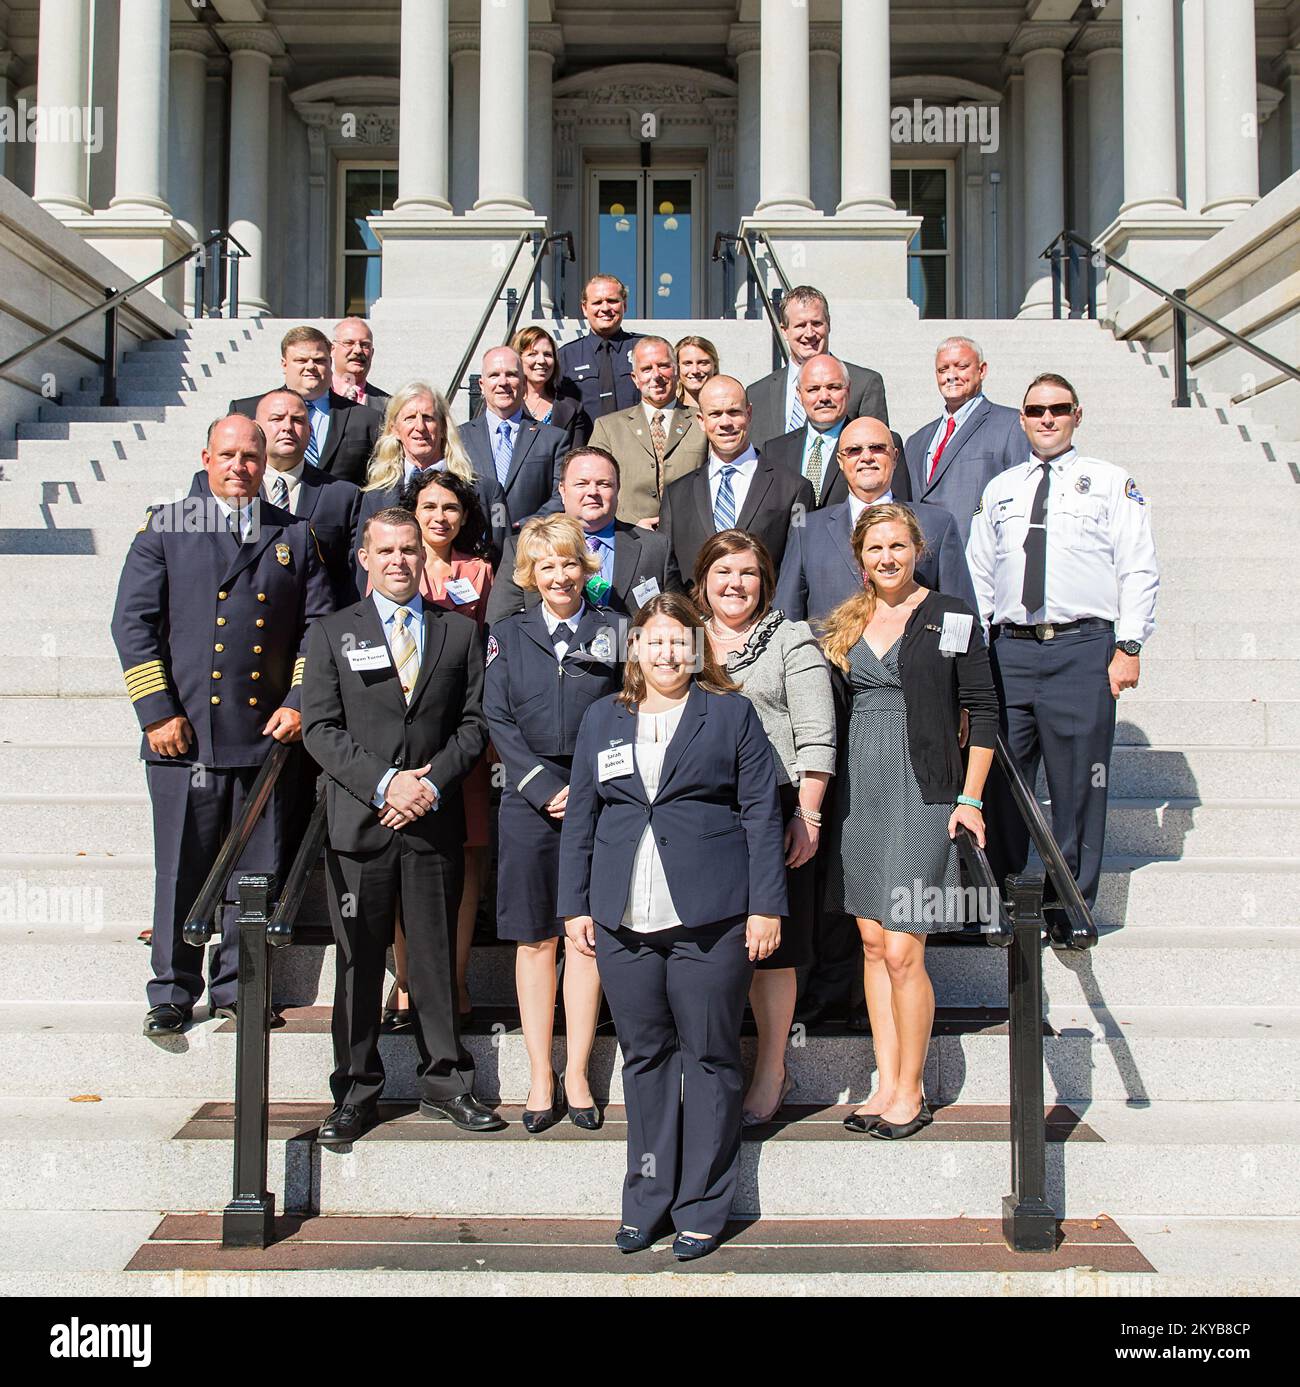 Photo of the 2015 Individual and Community Preparedness Award winners (Sarah Babcock, Brian Blake, Douglas Bryson, Douglas Eades, Brenda Emrick, Iskra Gencheva, Yuri Graves, Amalio Jusino, Betsy Miller, Brooke Mills, Frank Southern, Ryan Turner, Bill Whalen, Craig Wolfe) and their guests.. Photographs Relating to Disasters and Emergency Management Programs, Activities, and Officials Stock Photo